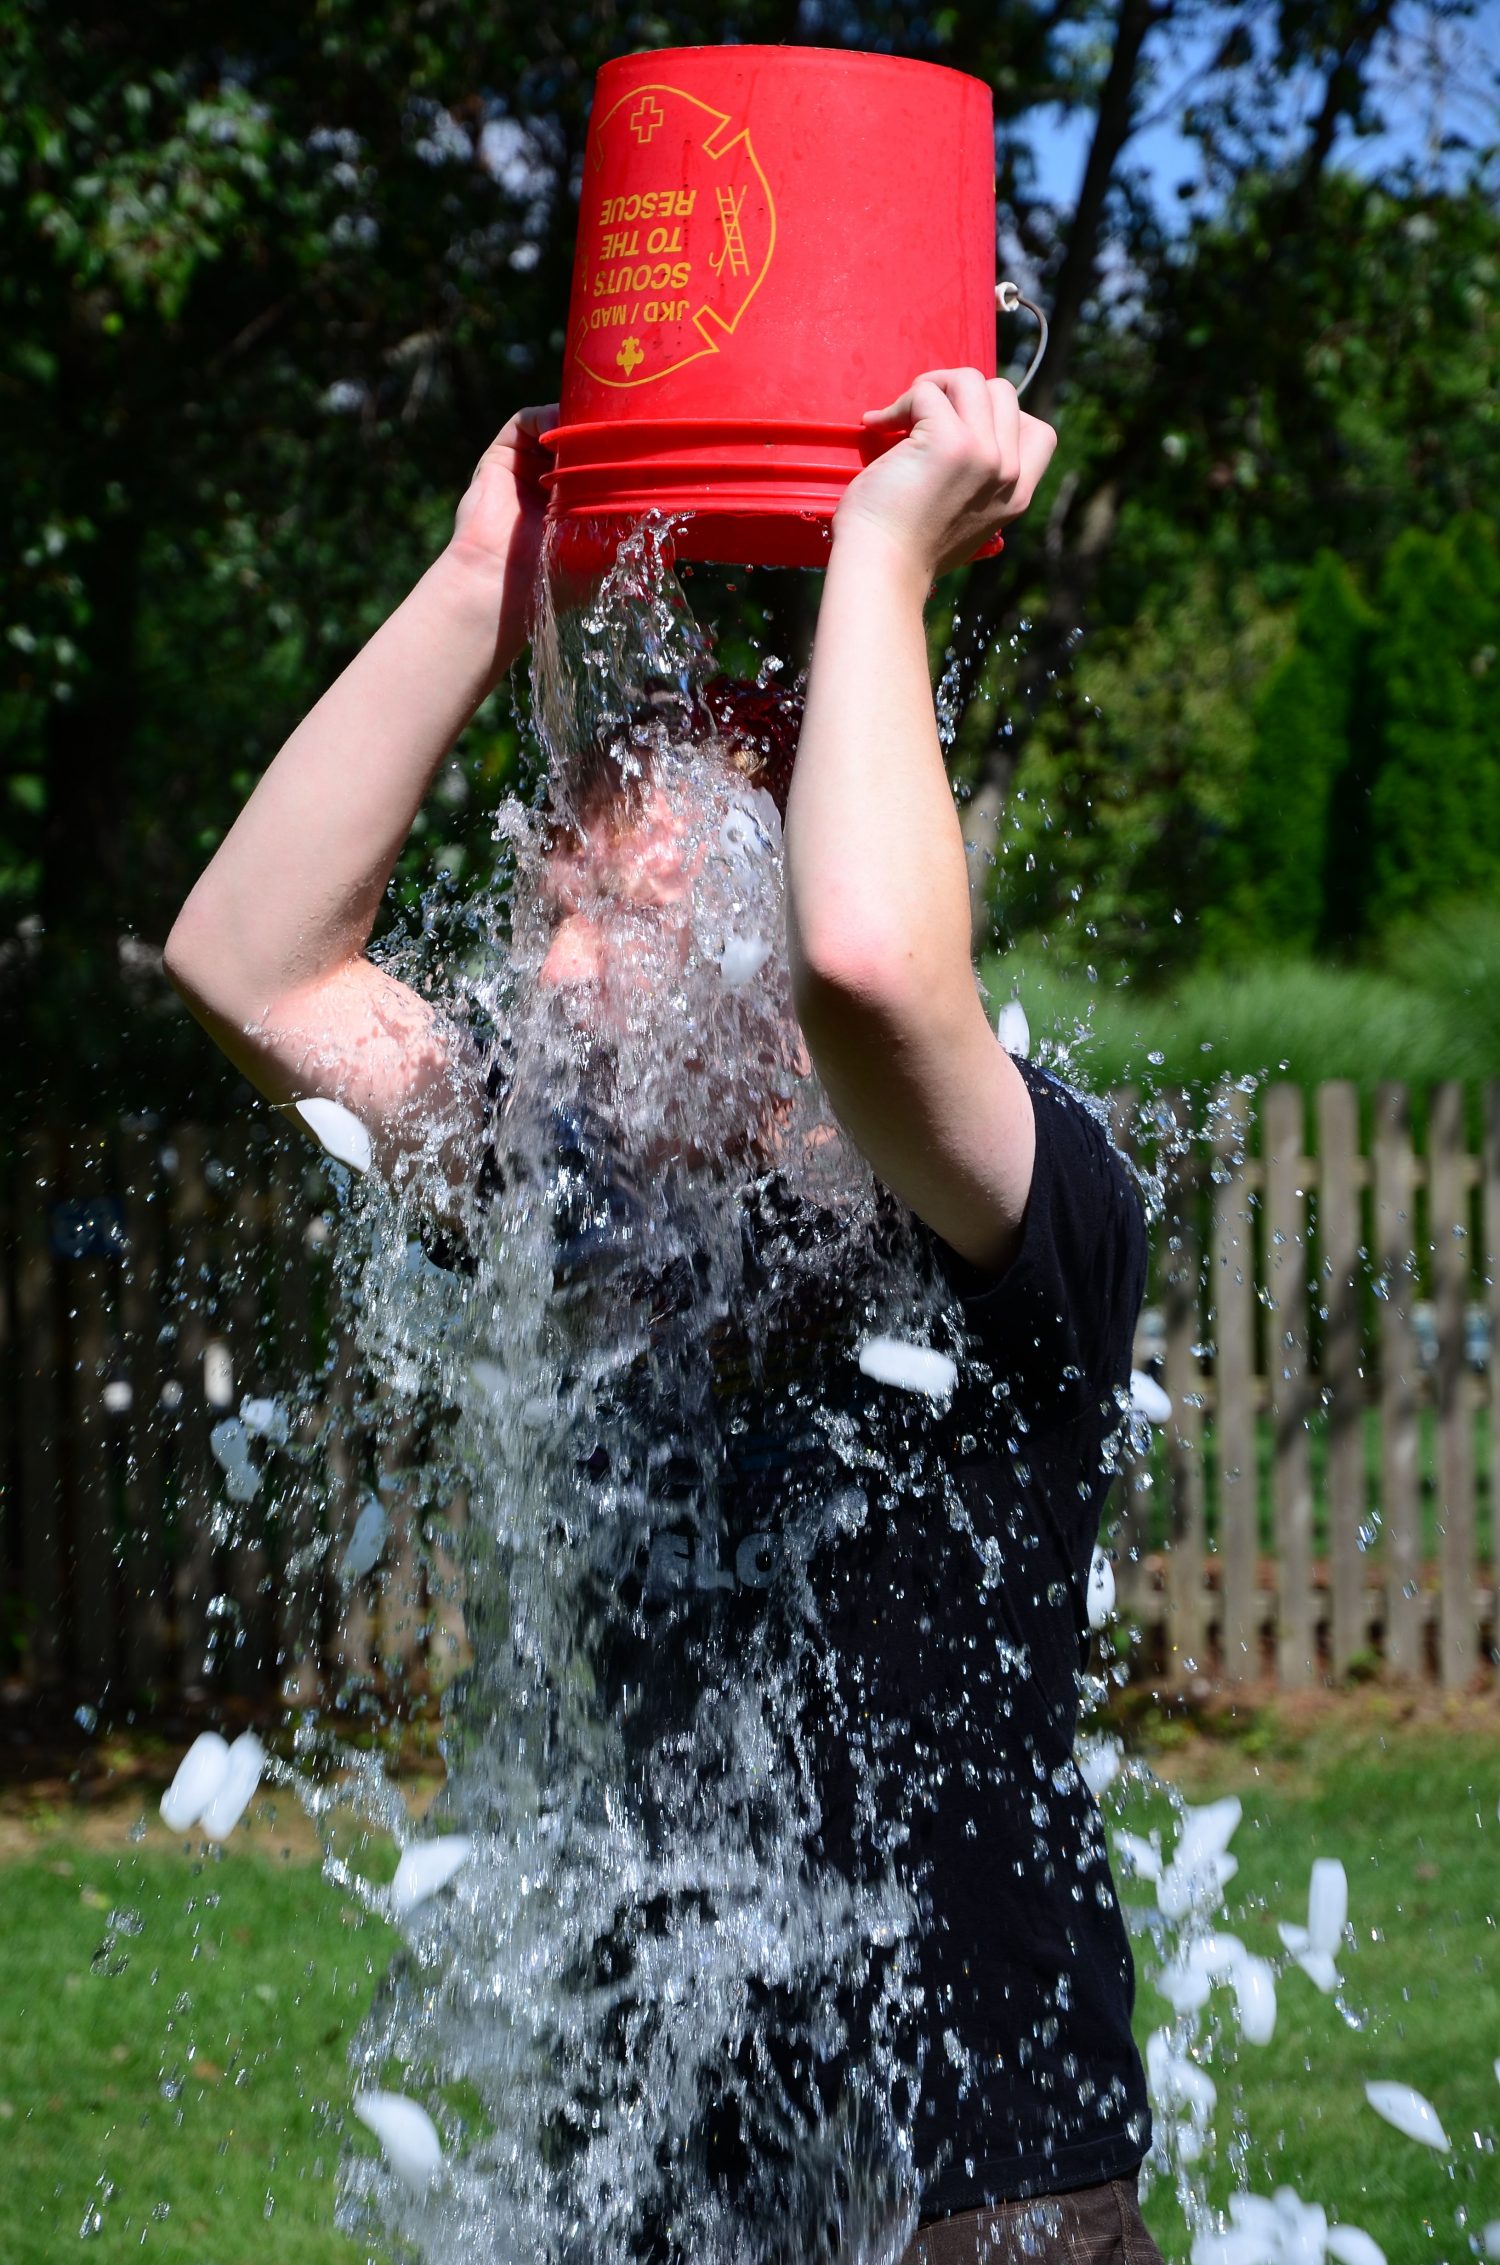 2014 called, it says you’re welcome for the ice bucket challenge